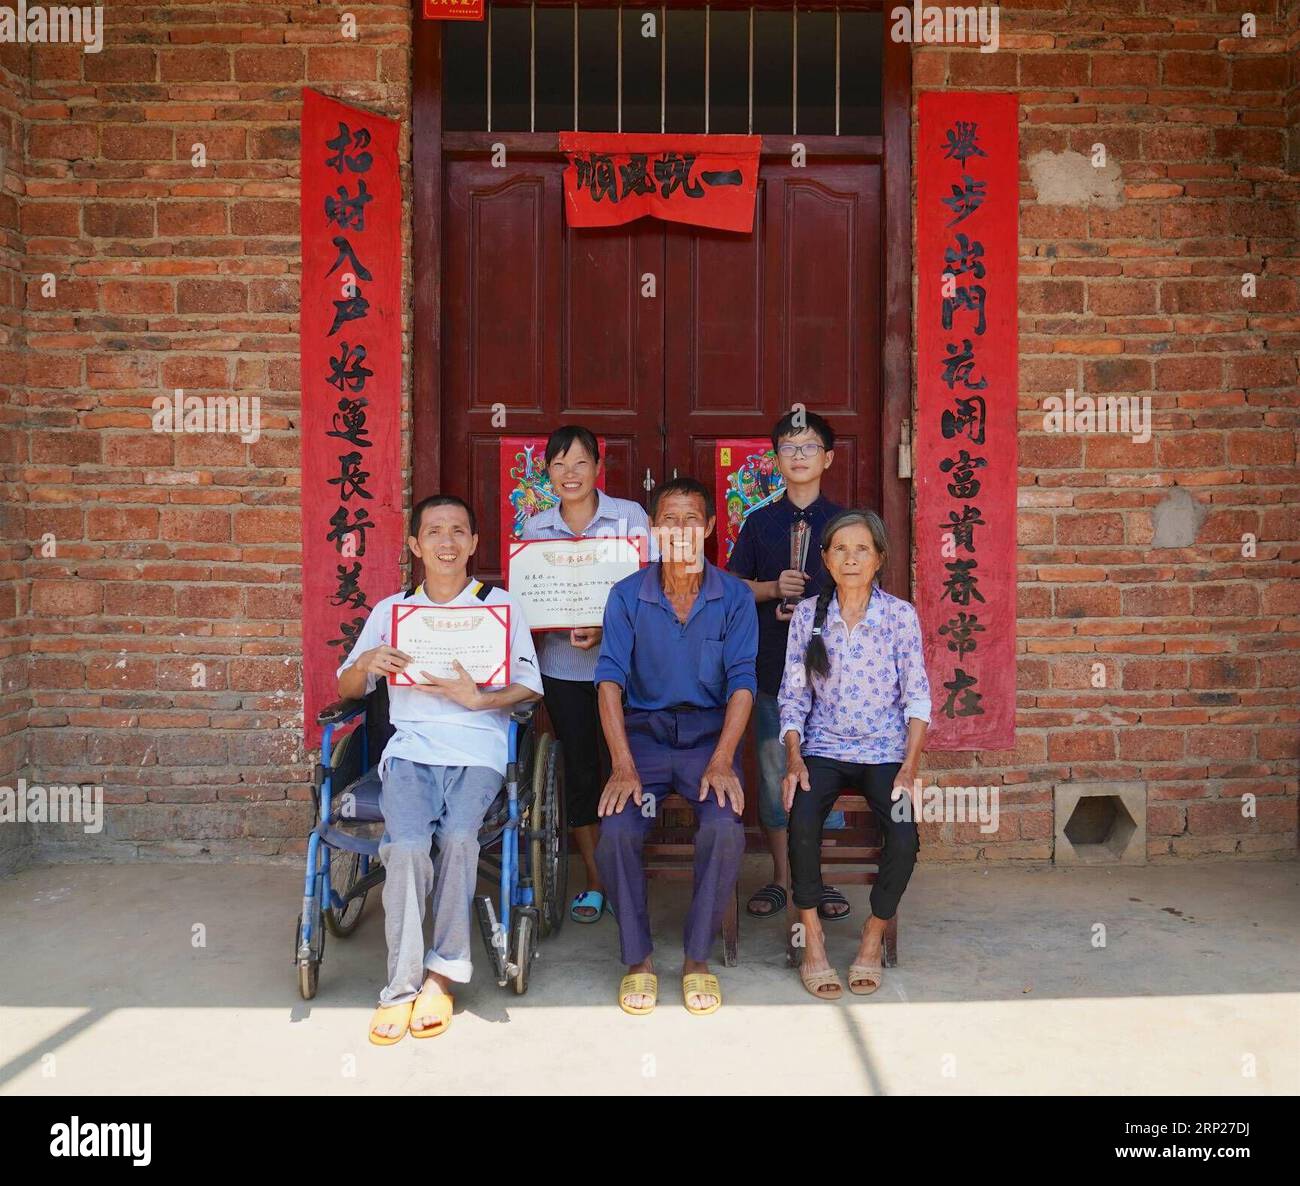 (180823) -- NANCHANG, Aug. 23, 2018 -- Zhang Chunmei (2nd L) and her husband (1st L) take photos with their families in front of their home in Wan an County, east China s Jiangxi Province, Aug. 22, 2018. Zhang Chunmei has been providing for her family after her husband, Xu Liliang, was diagnosed with Parkinson s disease in 2009. Thanks to her hardworking and the help from others, her family s living standard has improved. Her family decided to take a wedding dress photo to mark their 15 years wedding anniversary. ) (zyd) CHINA-JIANGXI-WEDDING ANNIVERSARY-POVERTY (CN) HuxChenhuan PUBLICATIONxNO Stock Photo